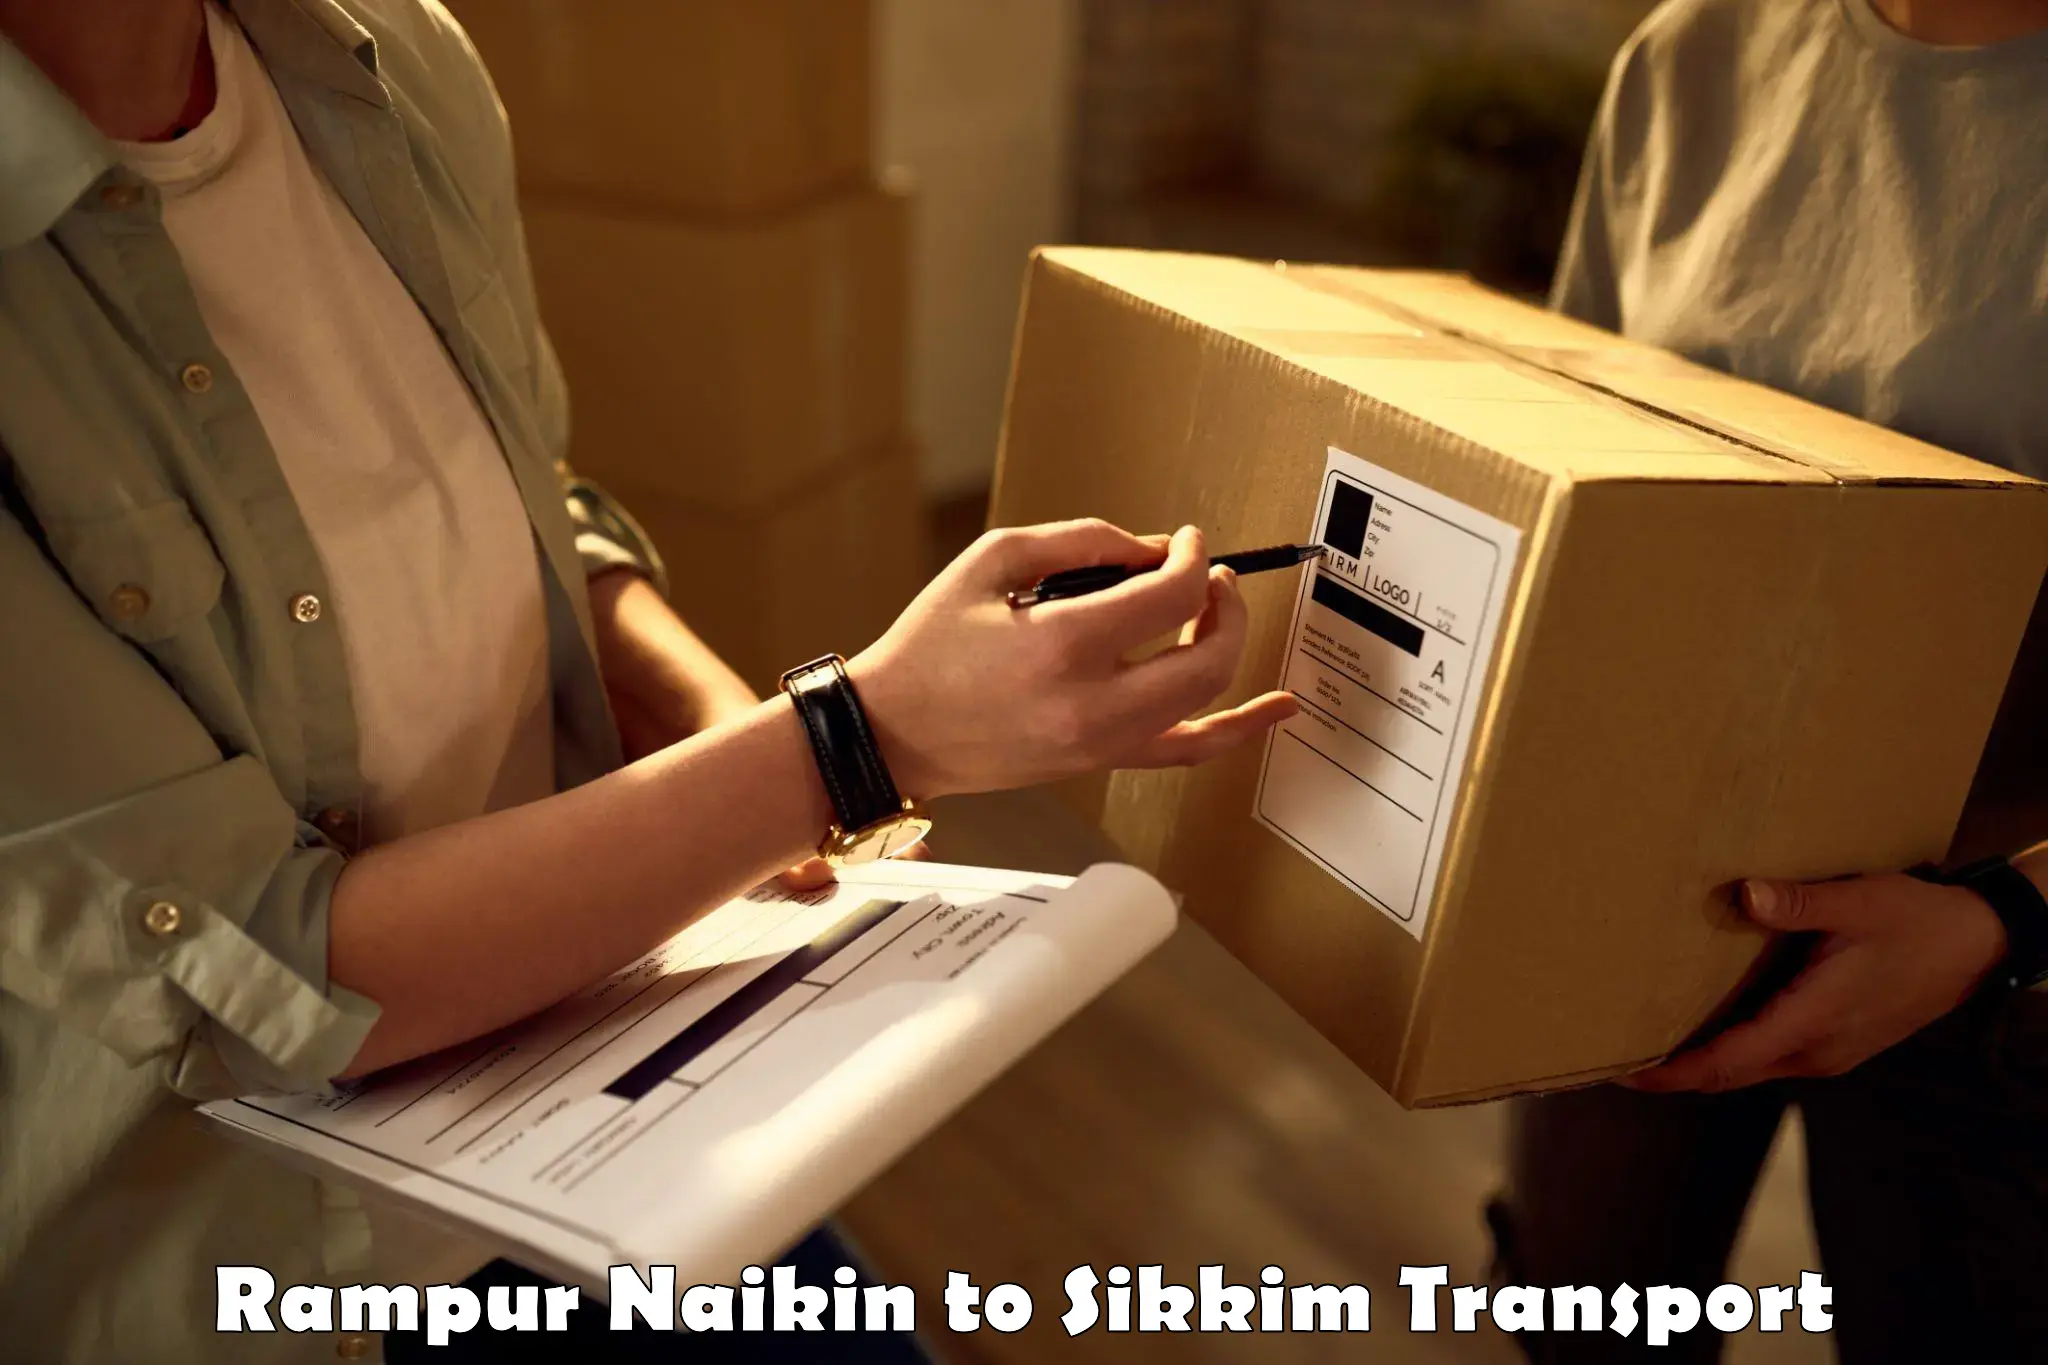 Delivery service Rampur Naikin to North Sikkim